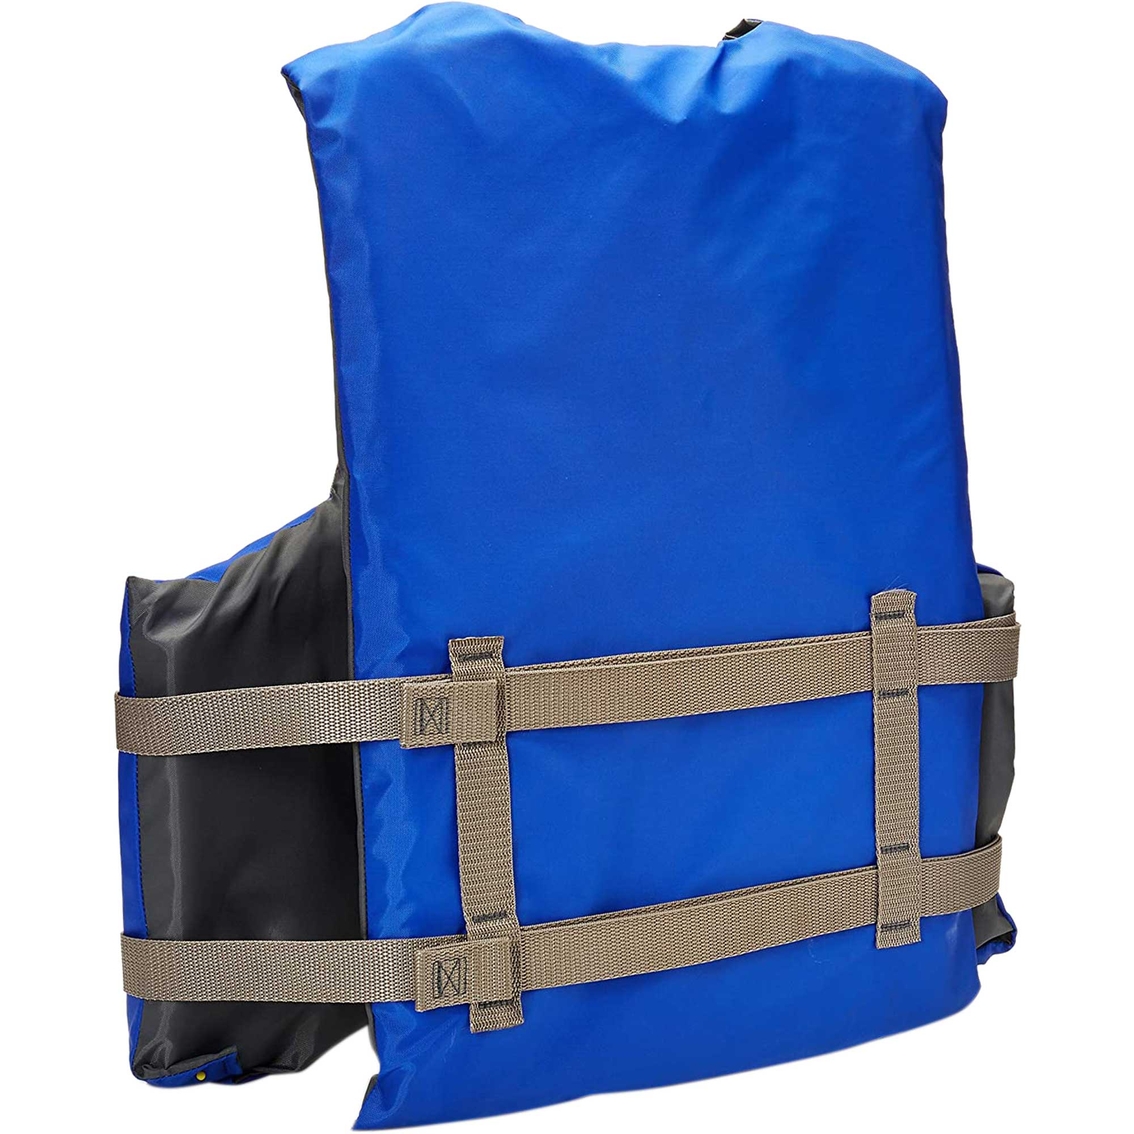 Stearns Classic Series Life Jacket - Image 2 of 2